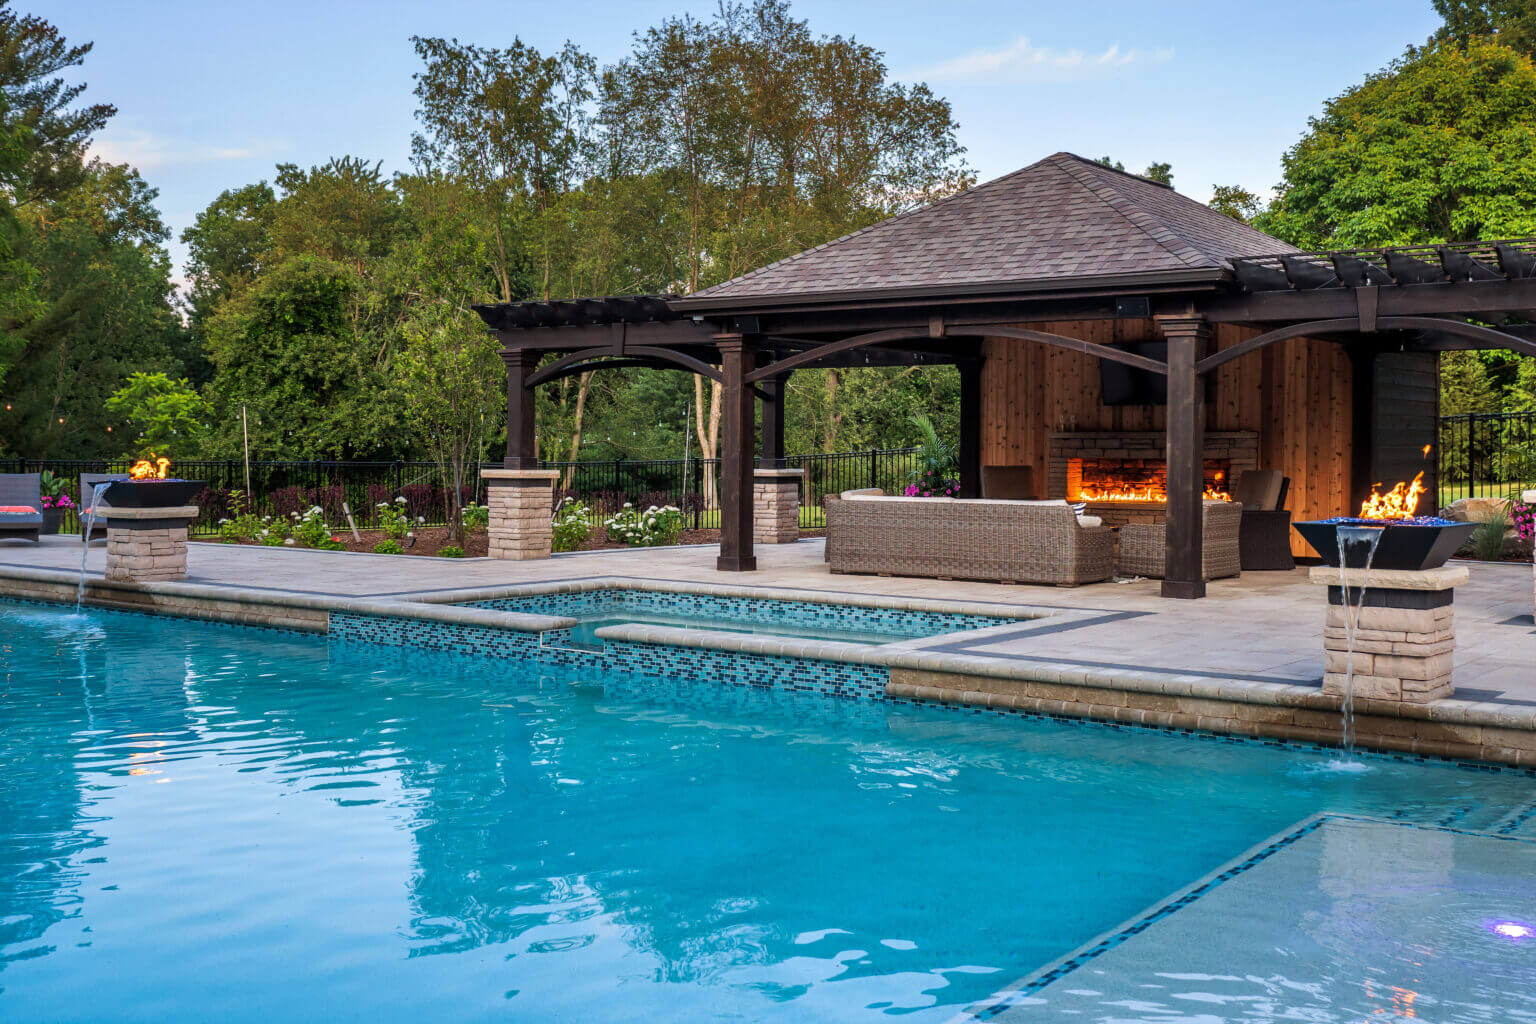 gunite pools, patio pavers, concrete paving, inground pools, pool and spa, fire bowls, patio covers in michigan, patio ideas, pool inspo, gazebos in michigan, cabanas in Michigan, backyard design, backyard landscape design